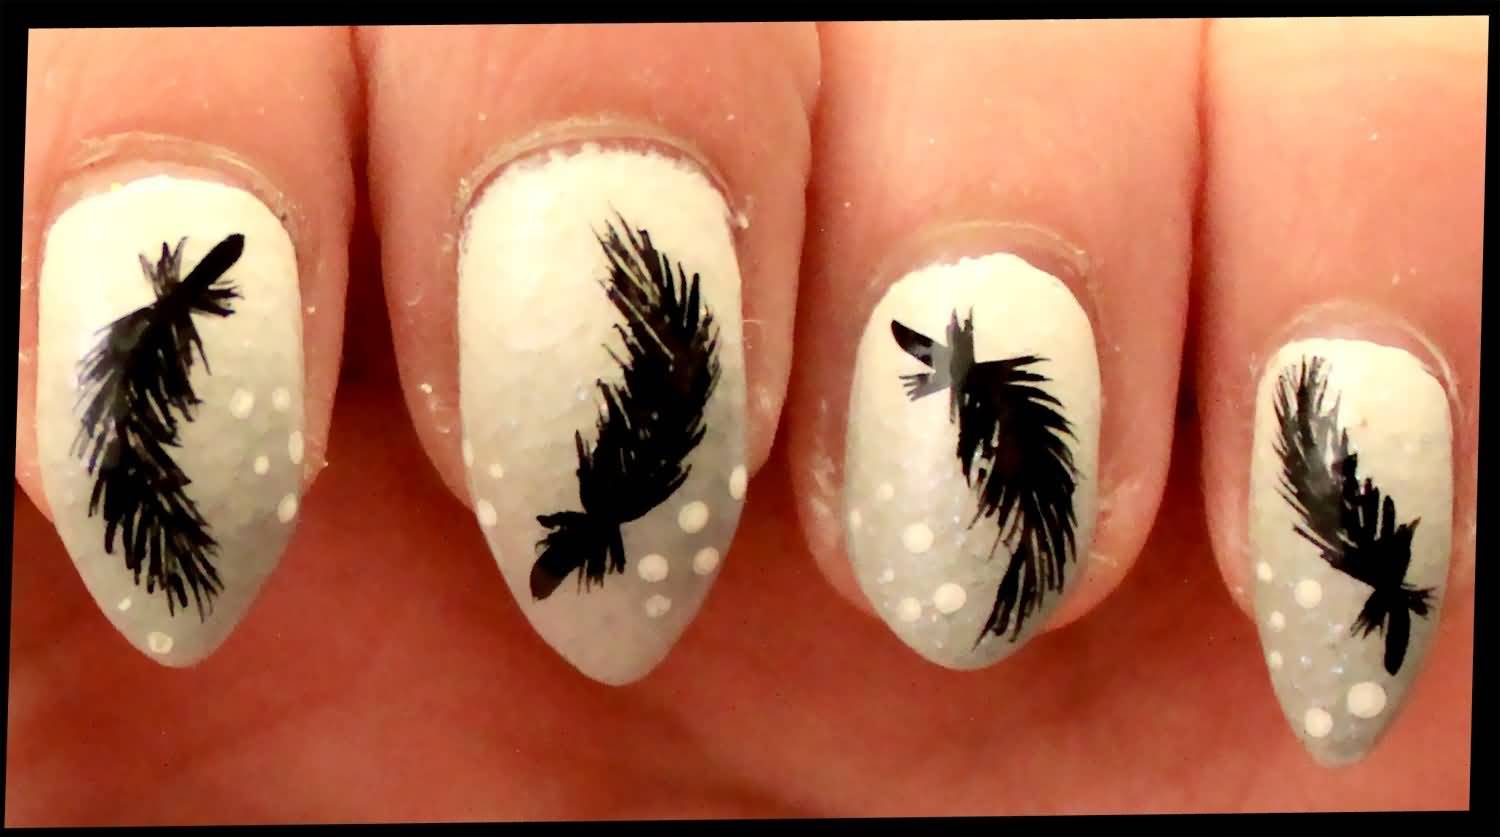 White Nails With Black Feather Nail Art